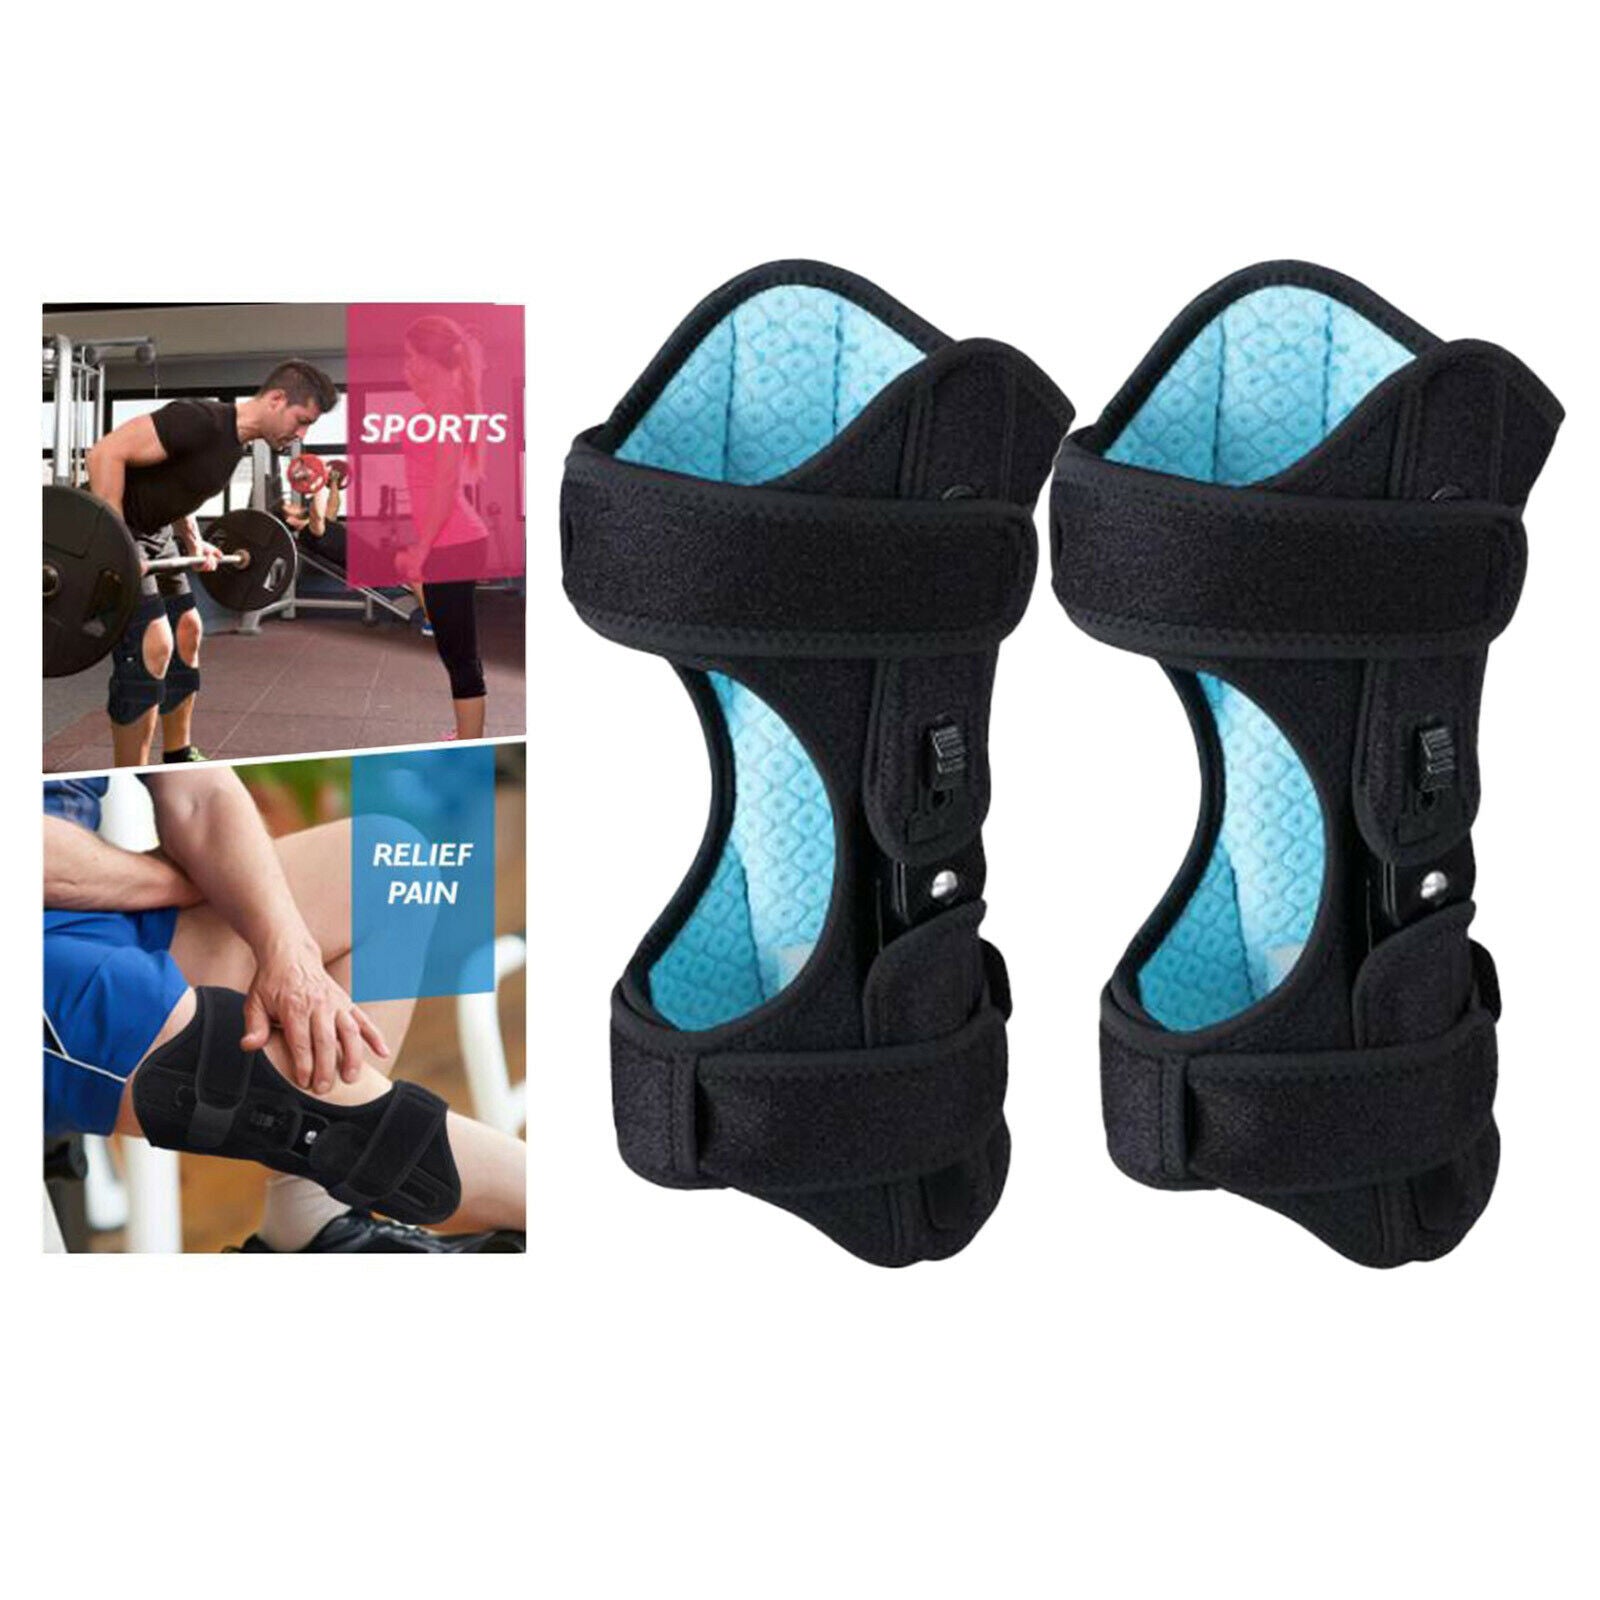 Knee Protection Booster Joint Knee Pad Support for Climbing Hiking Sports